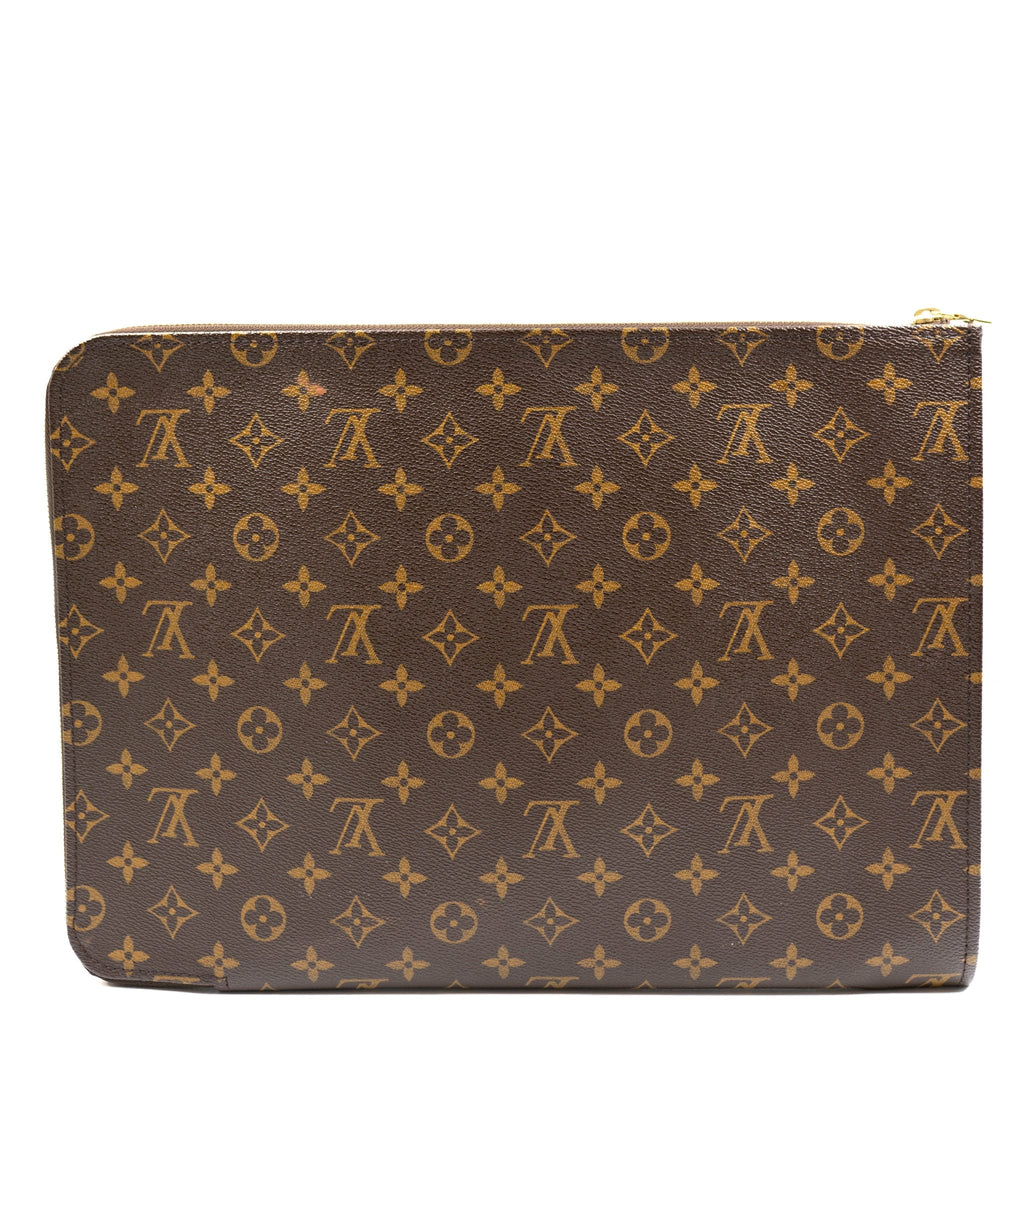 Louis Vuitton Soft Briefcase in Monogram Canvas 2000 for sale at Pamono